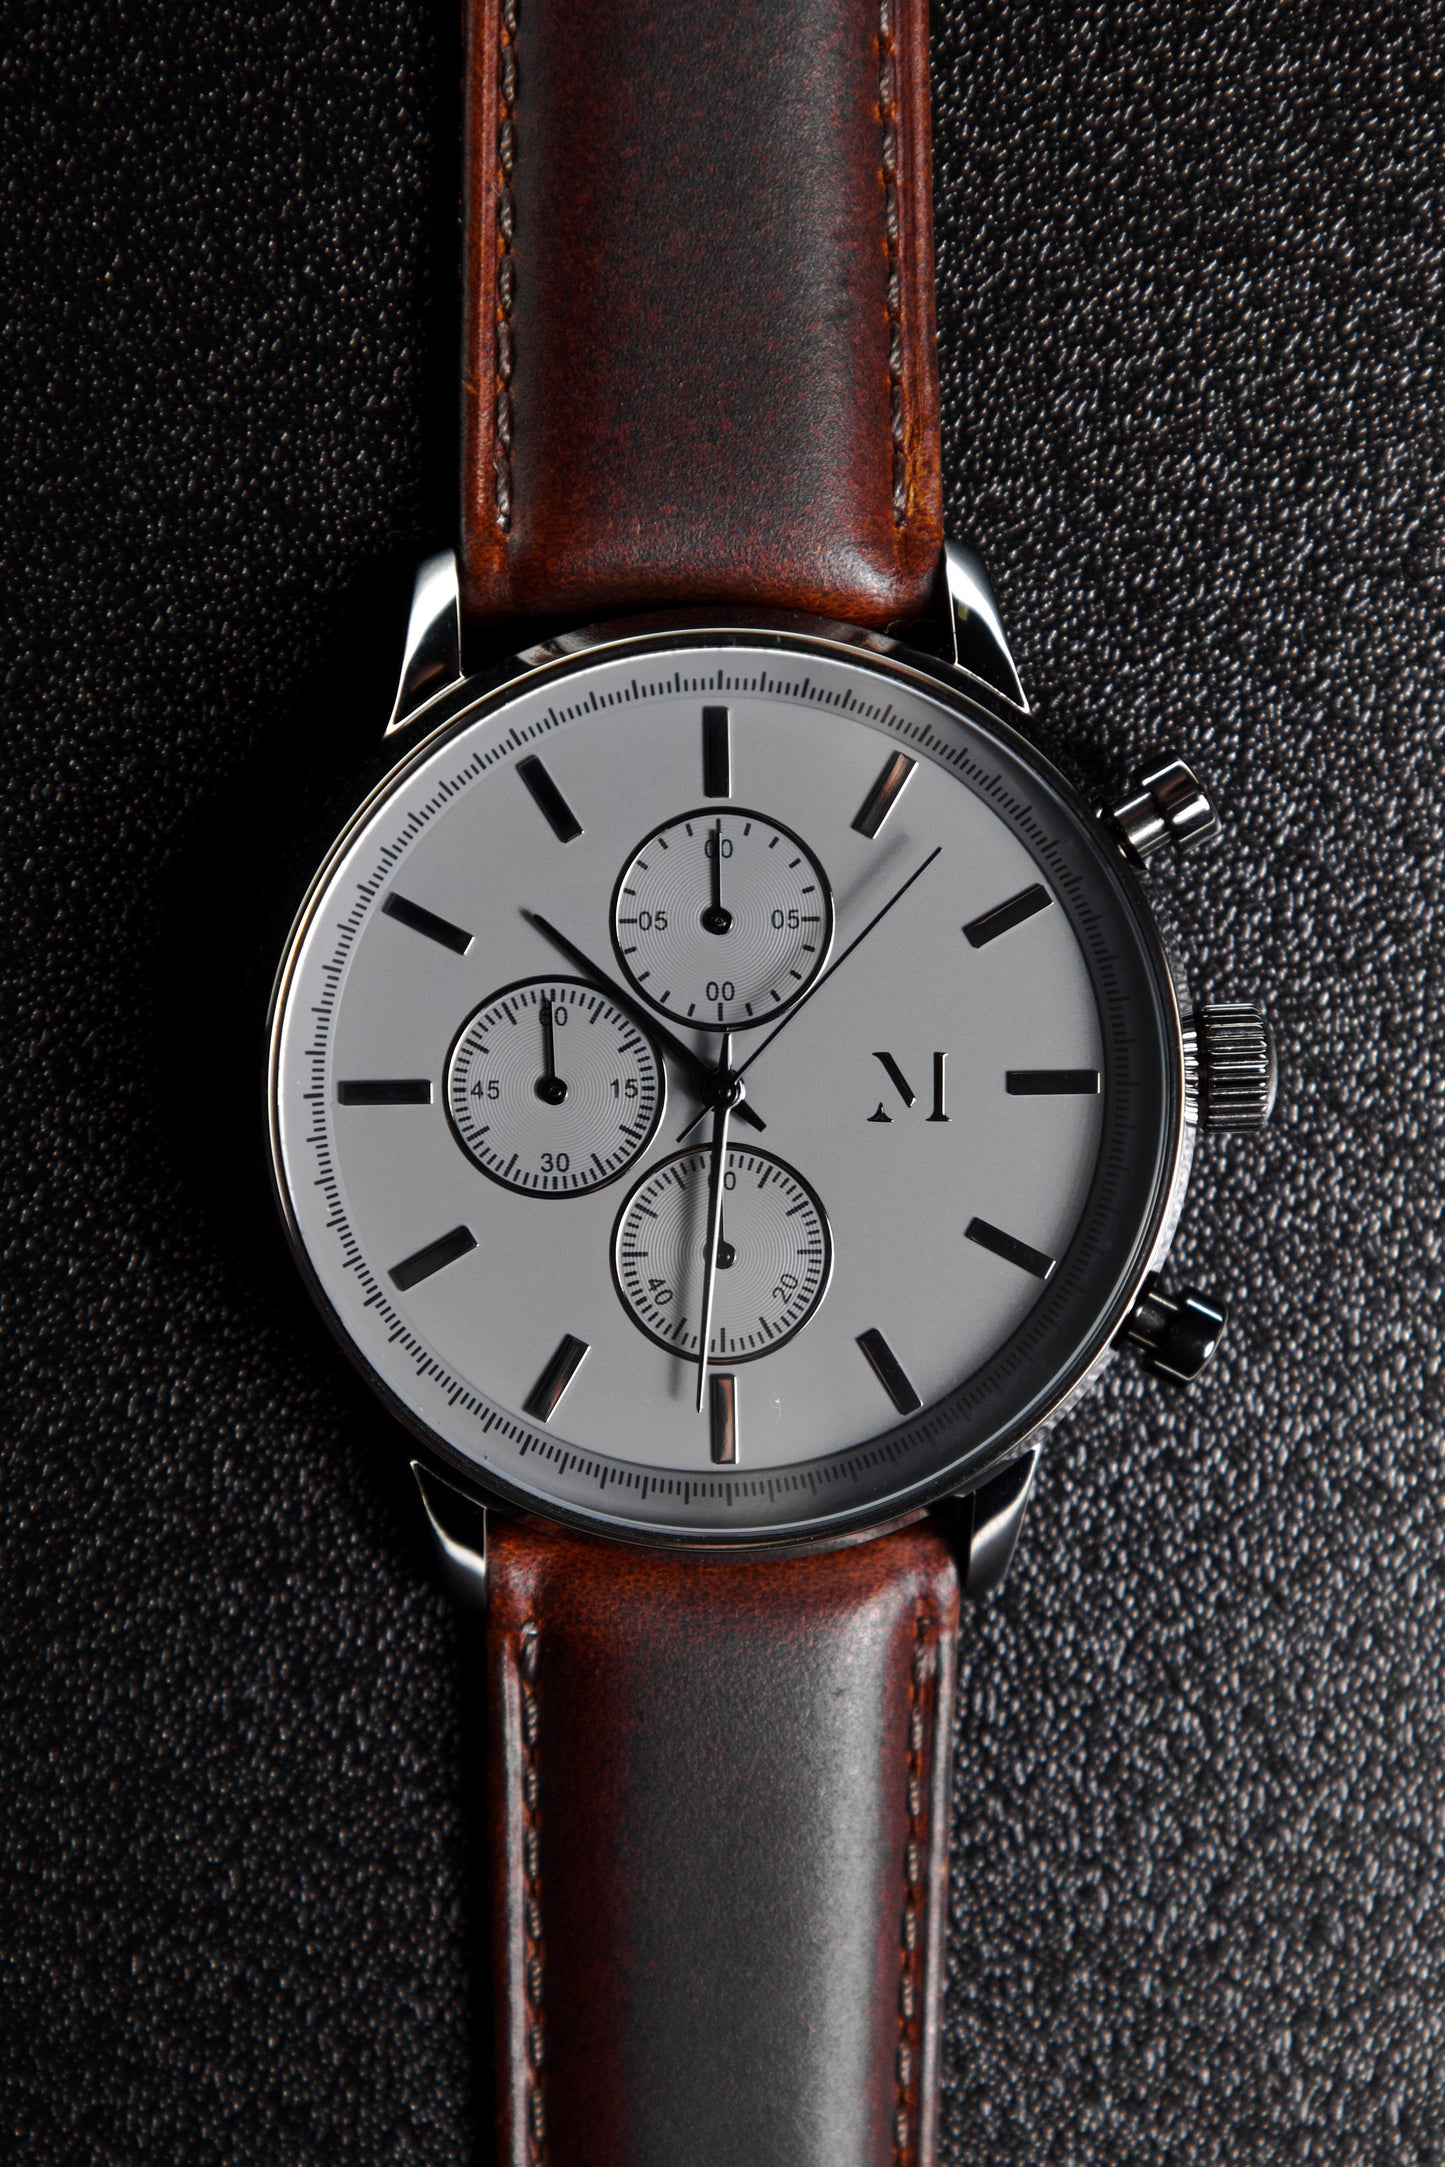 Iron Gray with Brown Leather Band